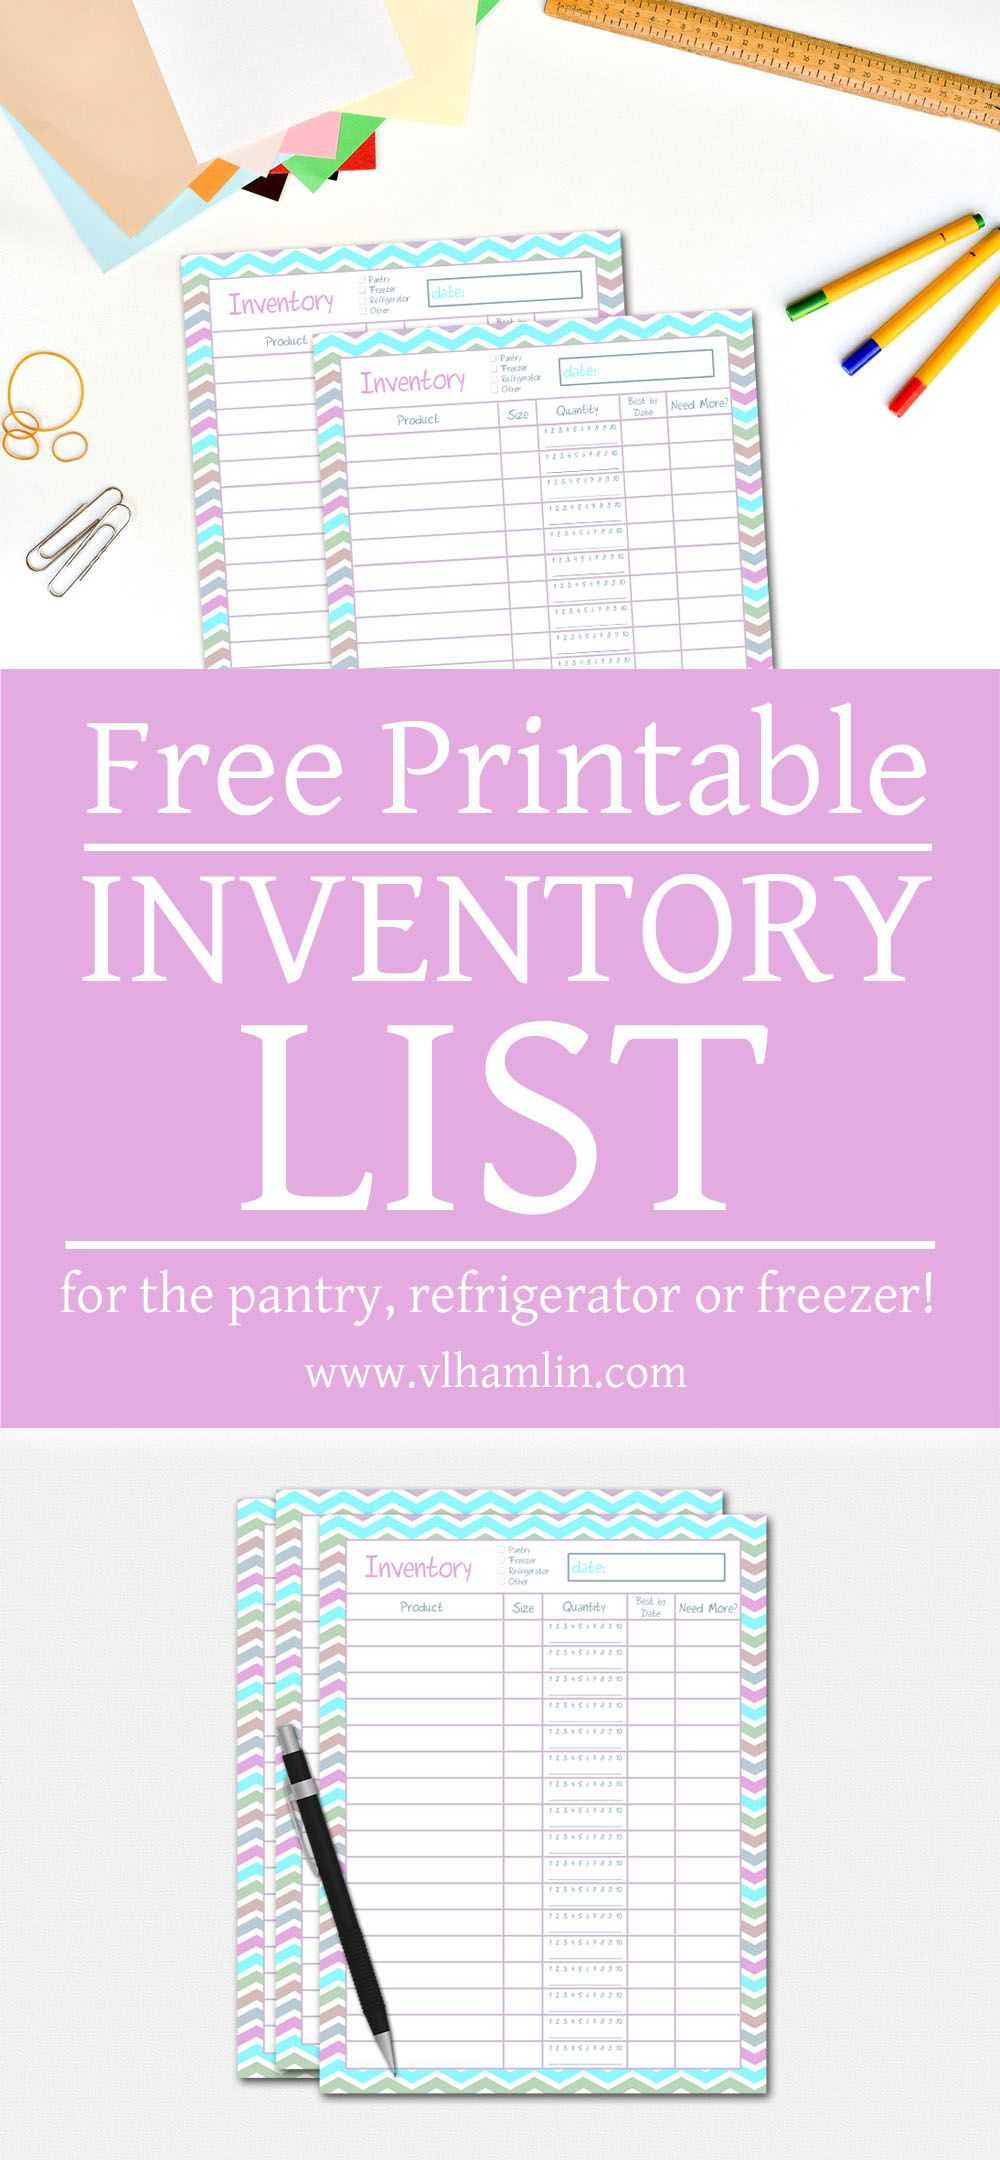 Free Printable Budget Binder Worksheets with Free Printable Inventory List for the Pantry Refrigerator or